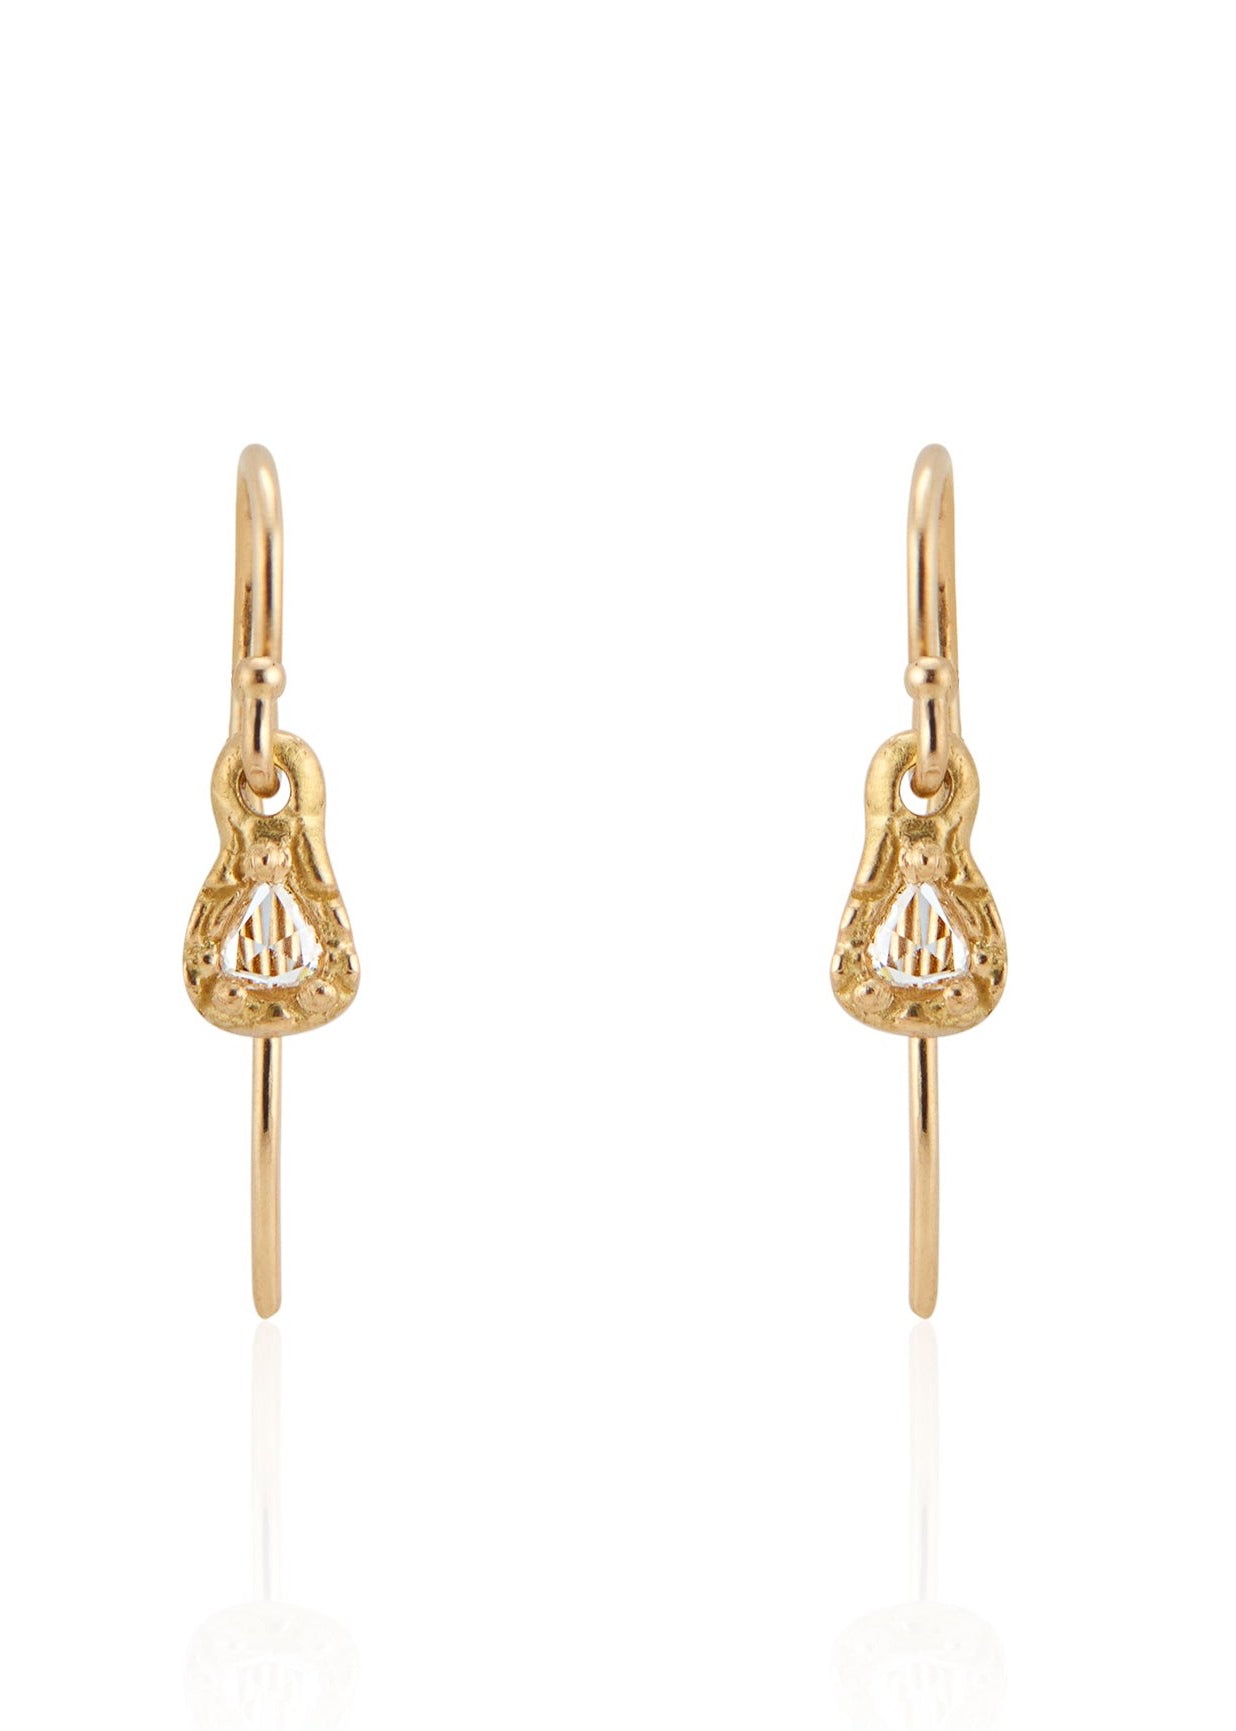 Intricately hand-carved gold cradles brilliant pear-shaped diamonds to create the Heroine-earring—noble, beautiful and graceful; a self-love story for the ages.